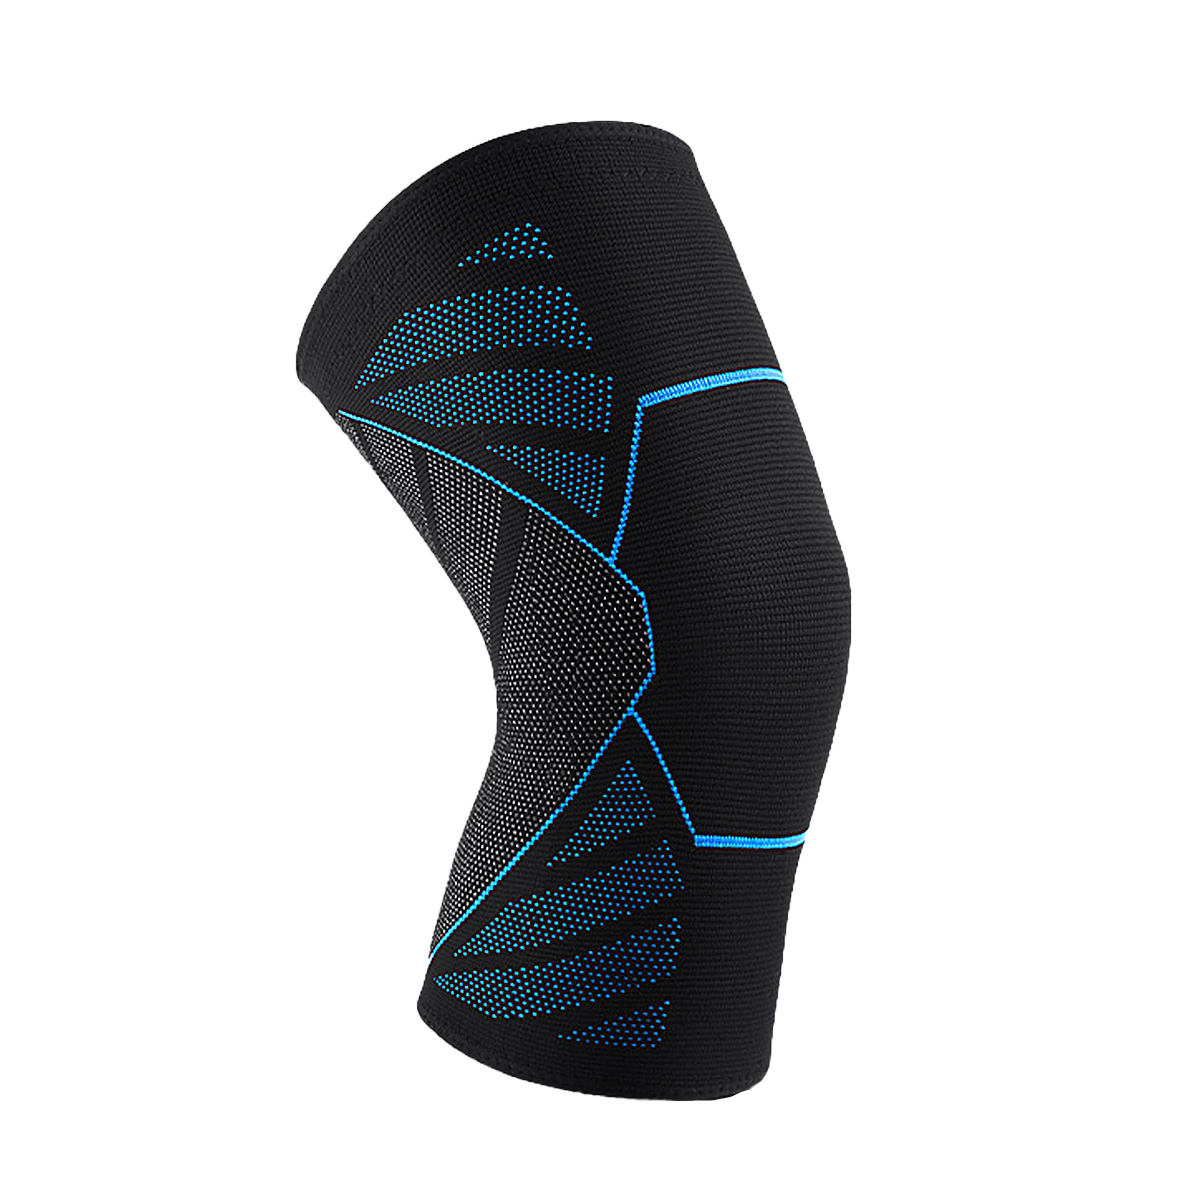 Unisex Compression Knee Sleeve For Basketball Featured Image